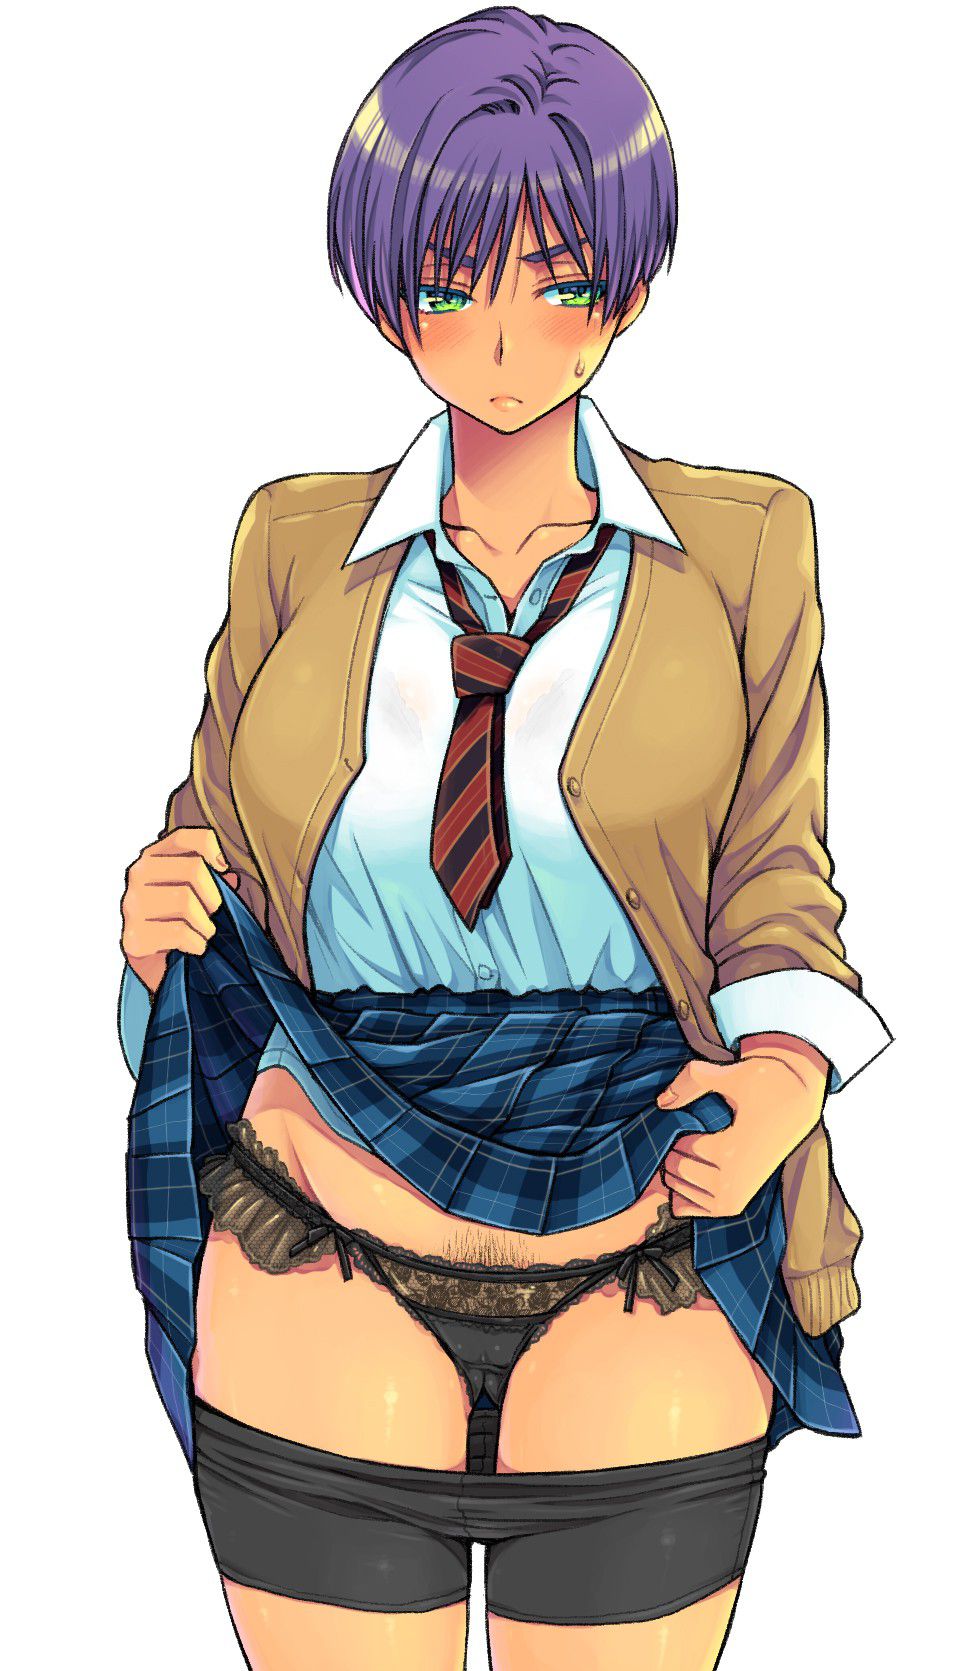 Secondary erotic image of the girl who is showing me lift and freeman skirt wwww part4 3